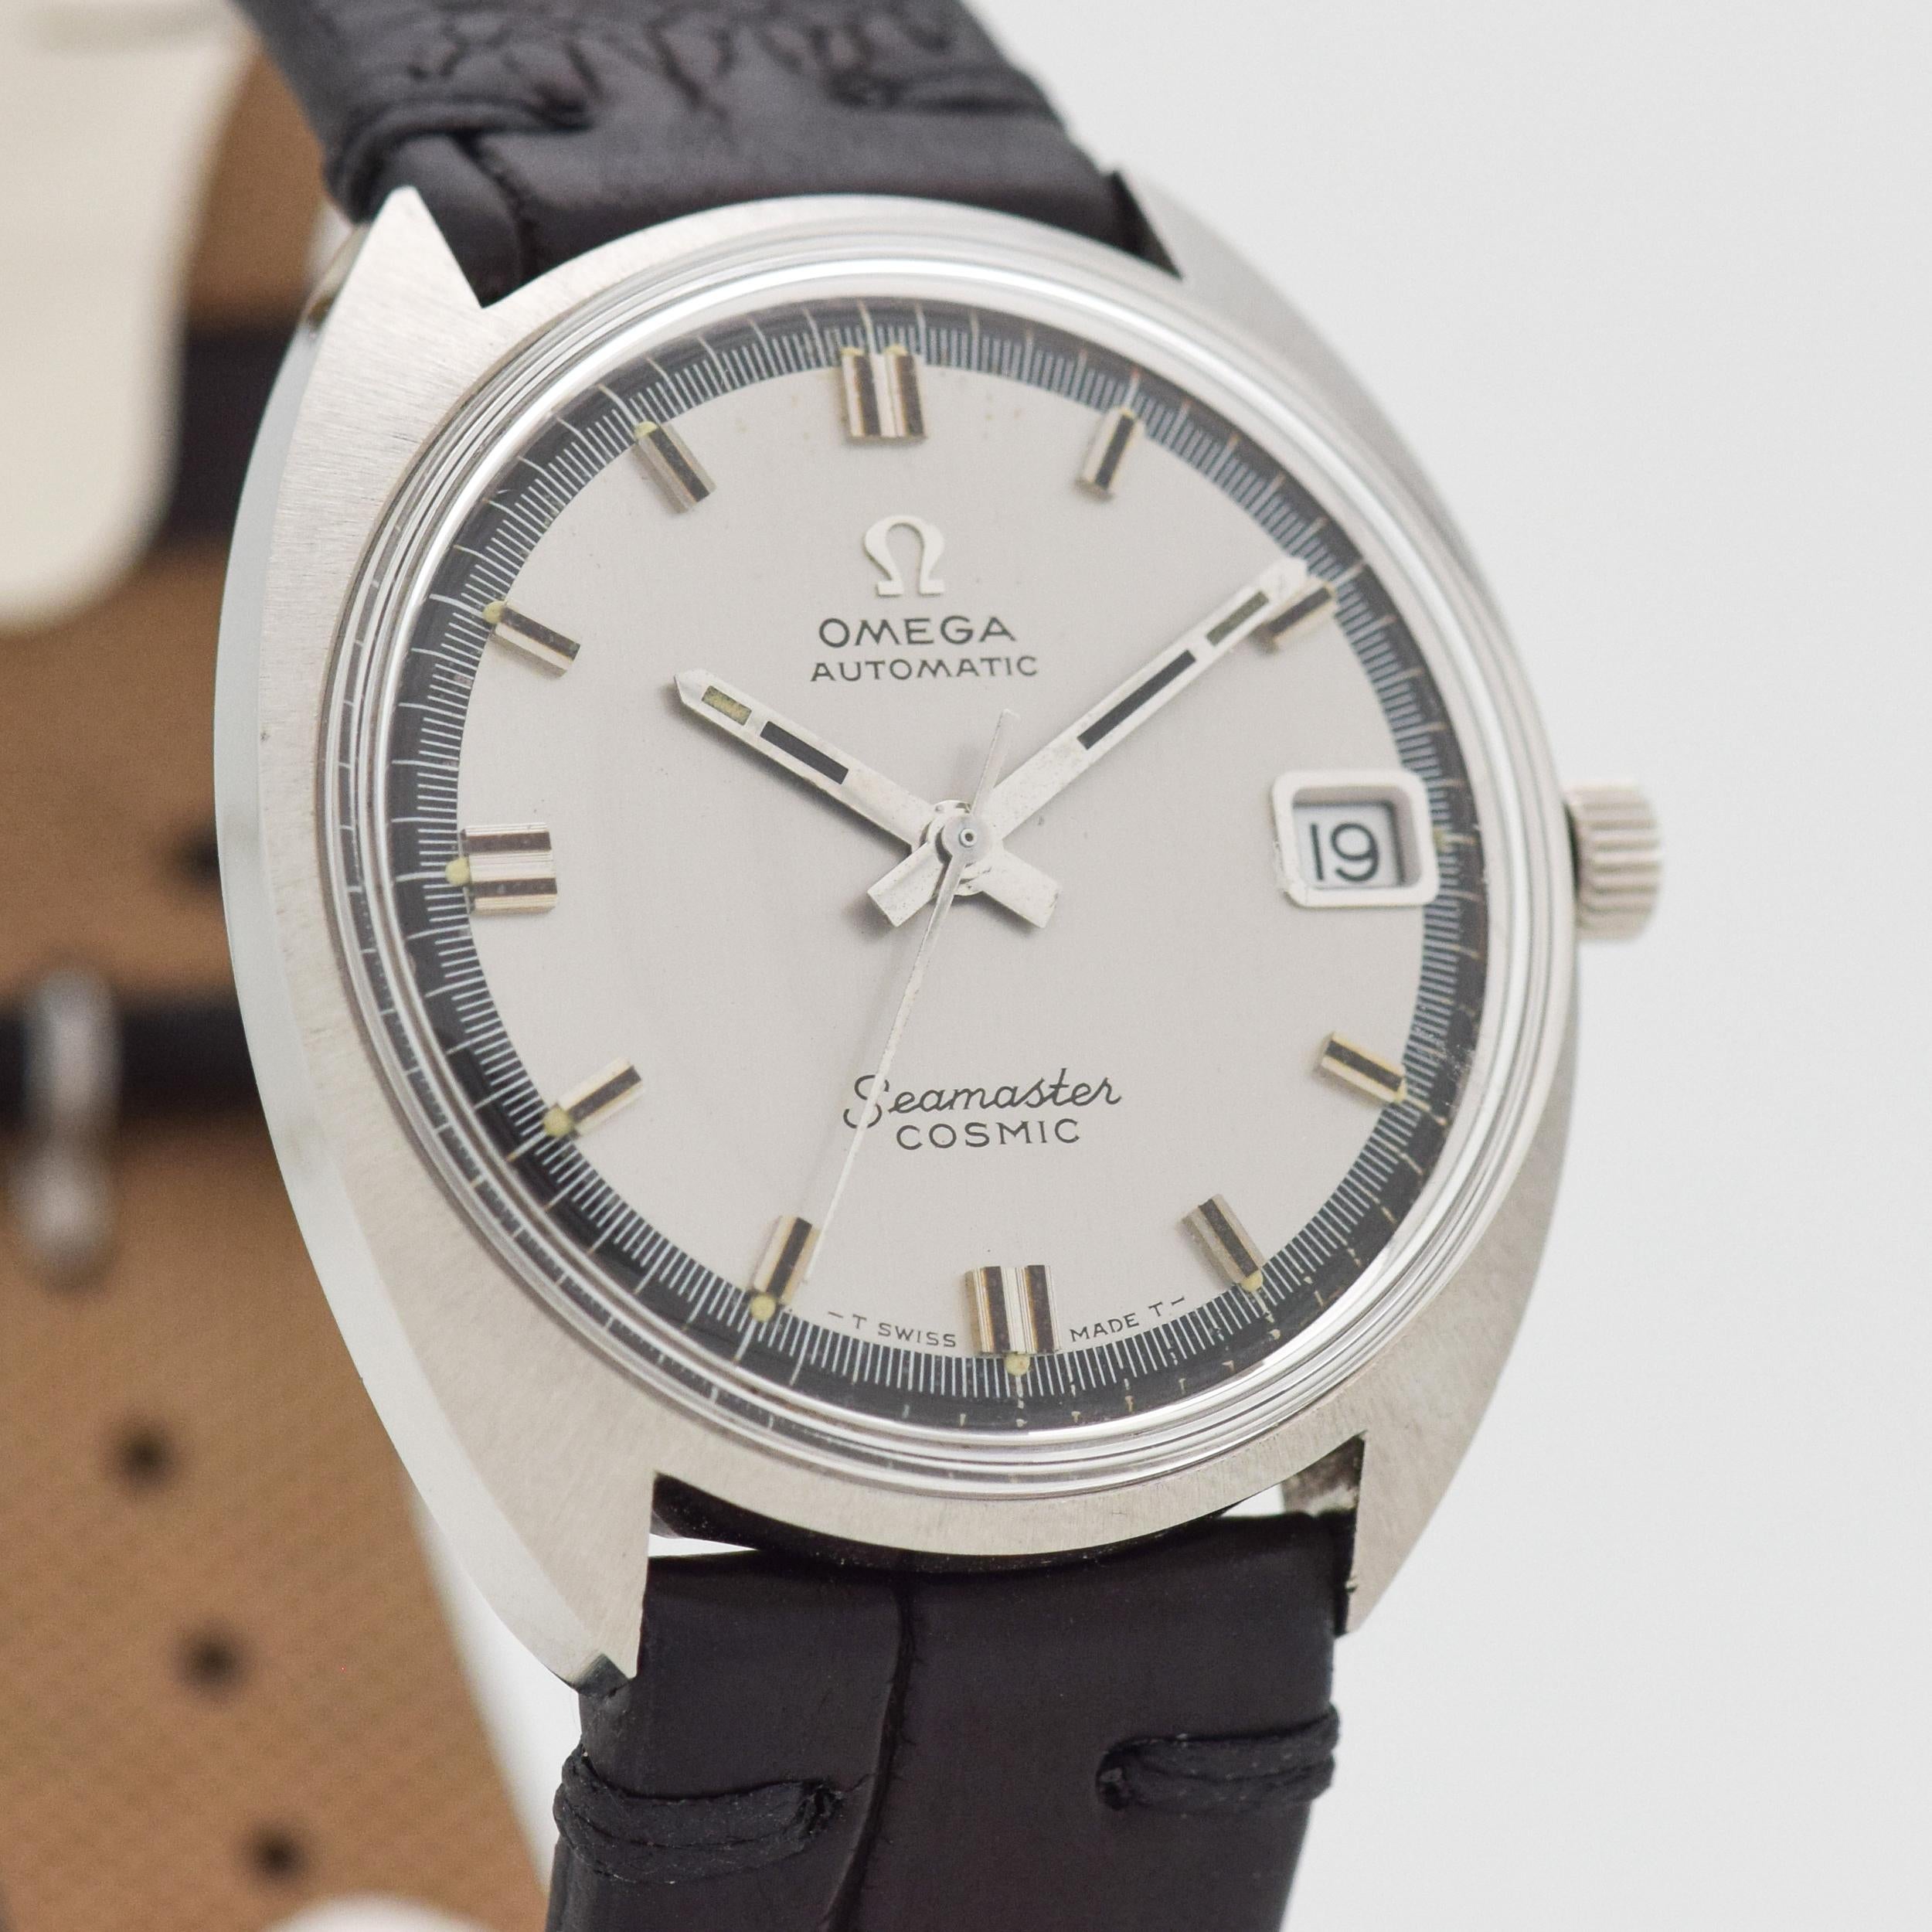 1970 Vintage Omega Seamaster Cosmic Reference 166.023. Stainless Steel, C-shaped watch case. 33mm wide. Original dial with date function. Powered by a 24-jewel, automatic caliber movement. Equipped with a black-colored, Genuine Alligator